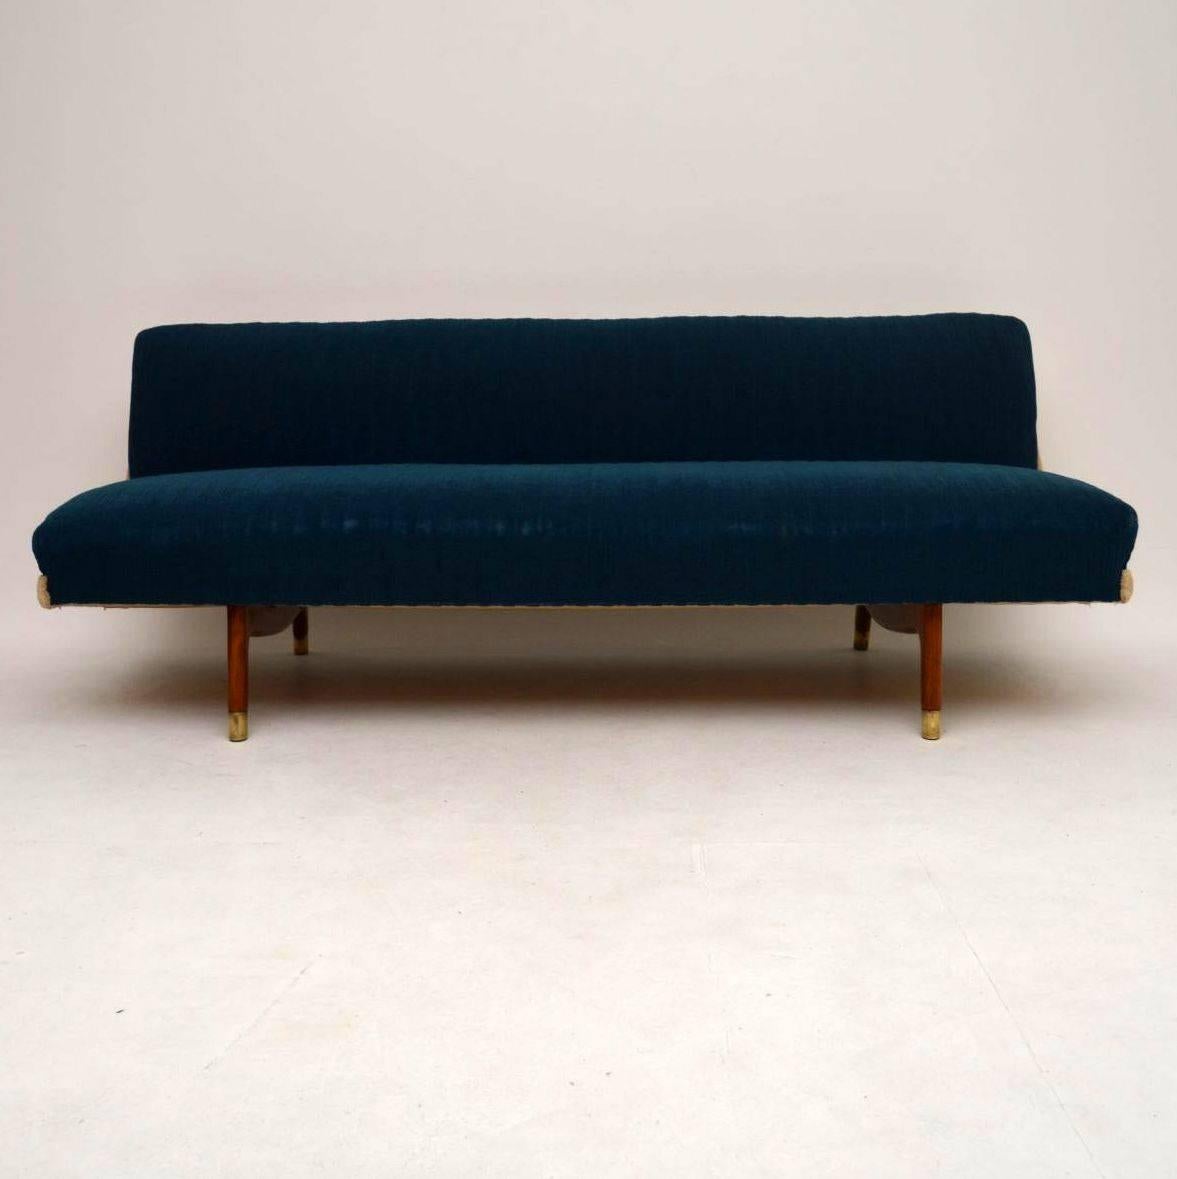 A very stylish and comfortable vintage sofa bed, this was made in Denmark, it dates from around the 1950s-1960s. It is in very good condition for its age, with some minor wear here and there. The blue fabric is free from any marks, it has worn a